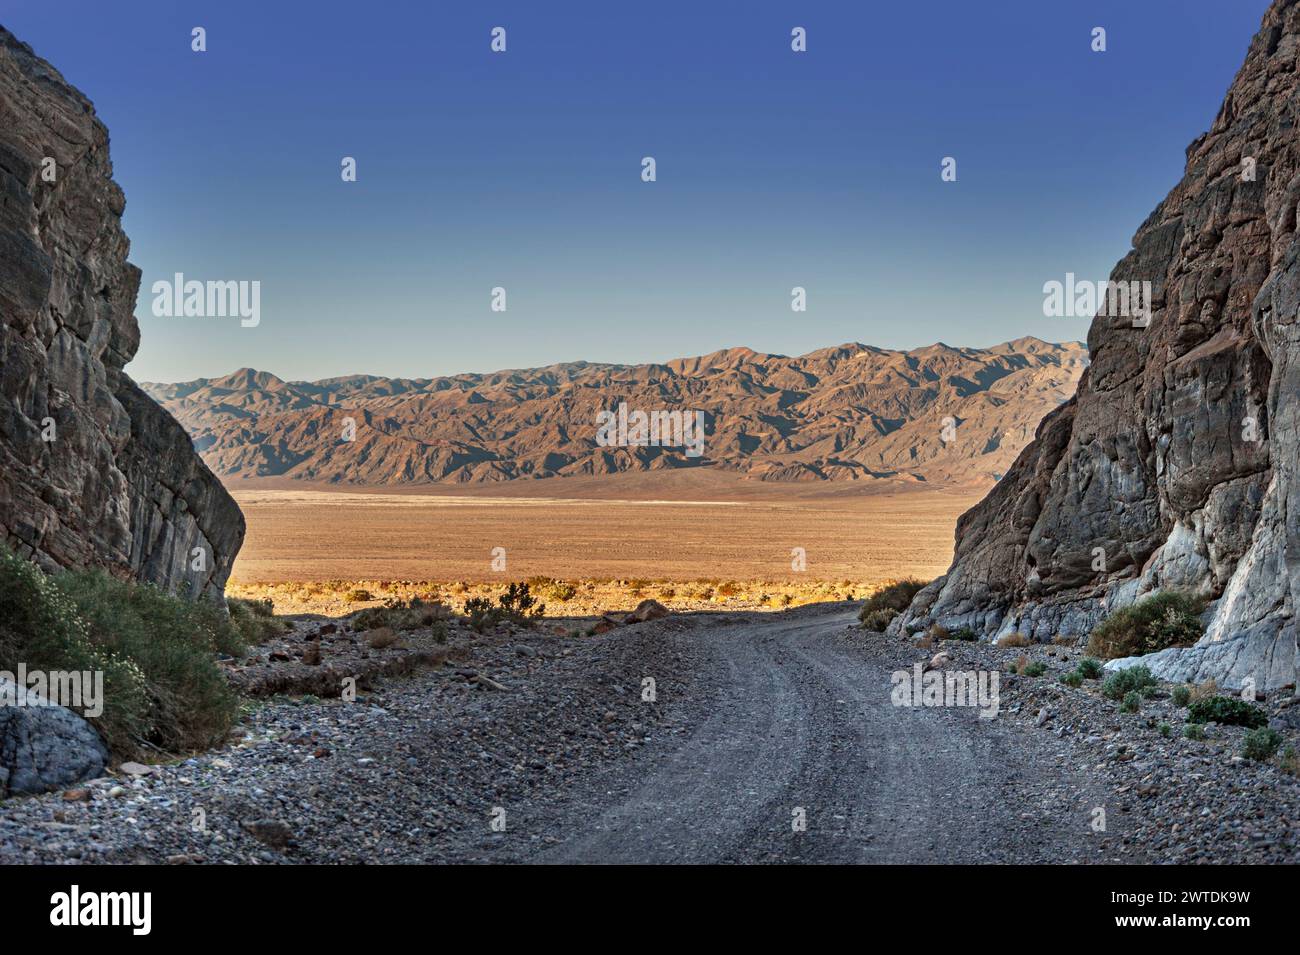 Dirt road through Death Valley Stock Photo